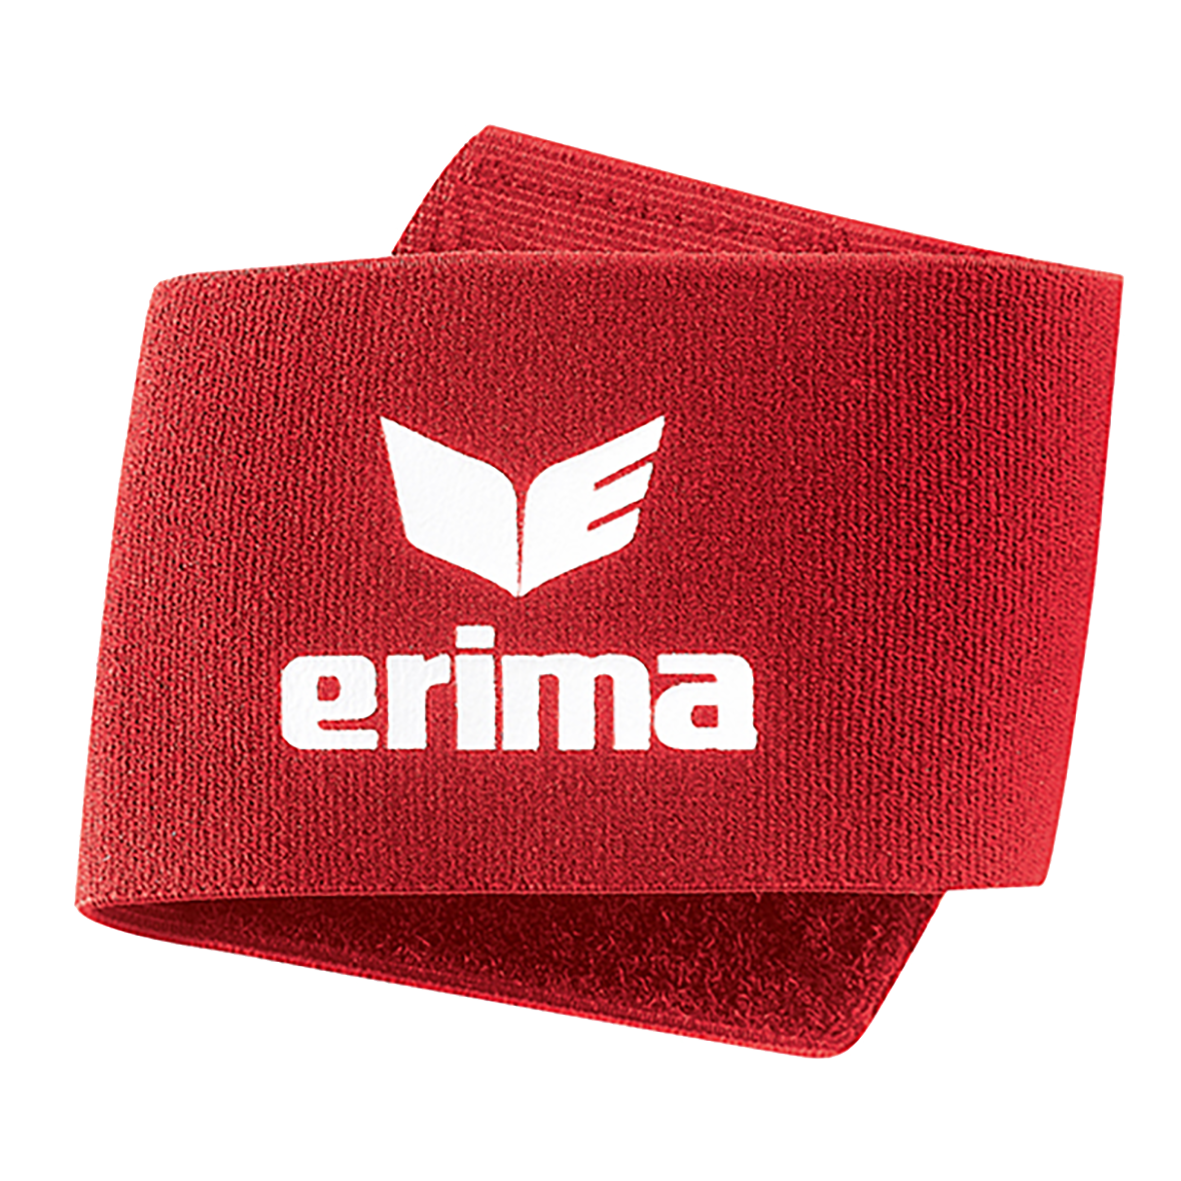 ERIMA GUARD STAYS, NEW RED.